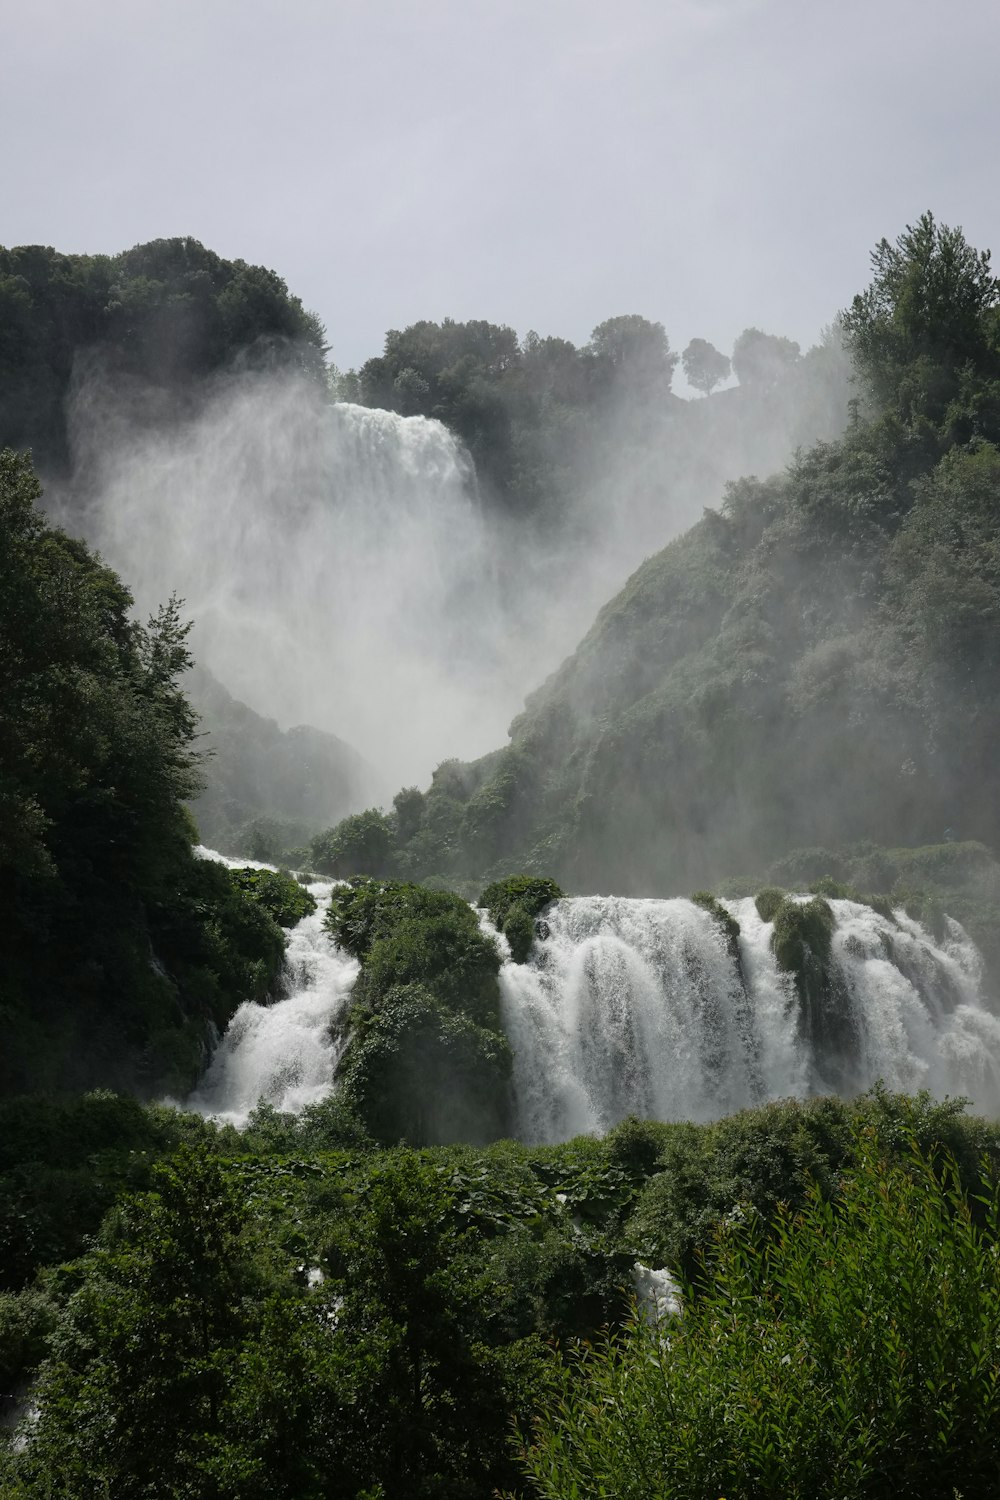 Cascata delle Marmore surrounded by trees